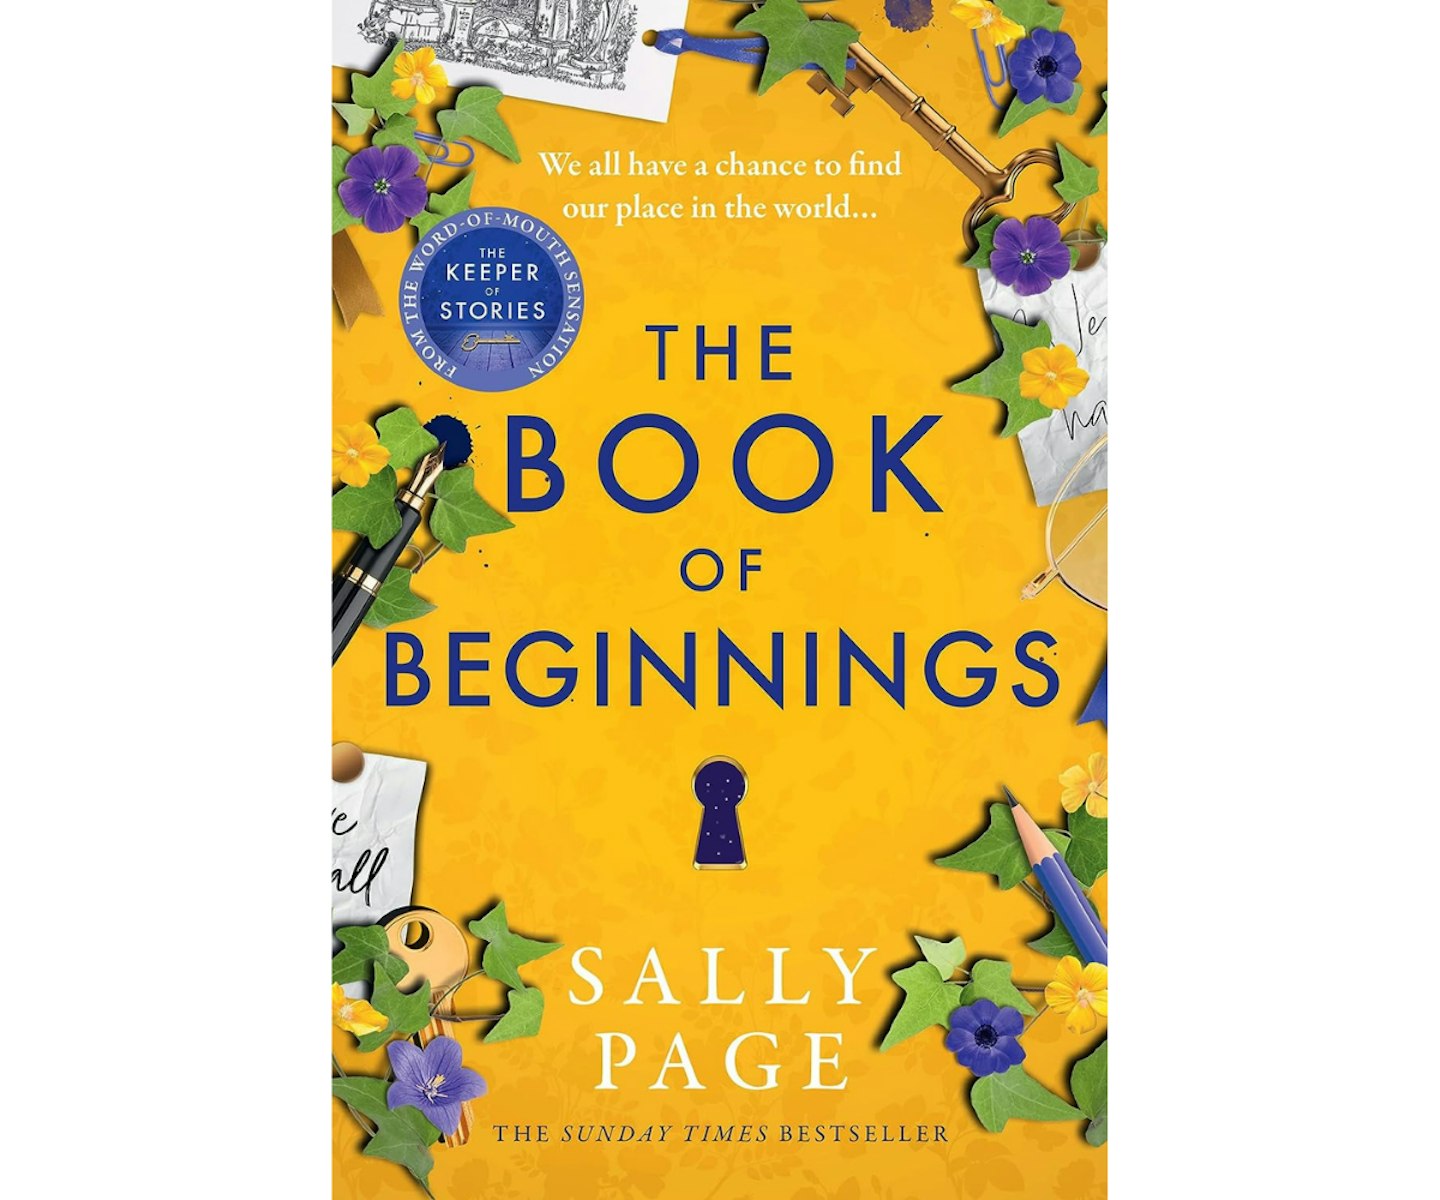 The Book Of Beginnings by Sally Page